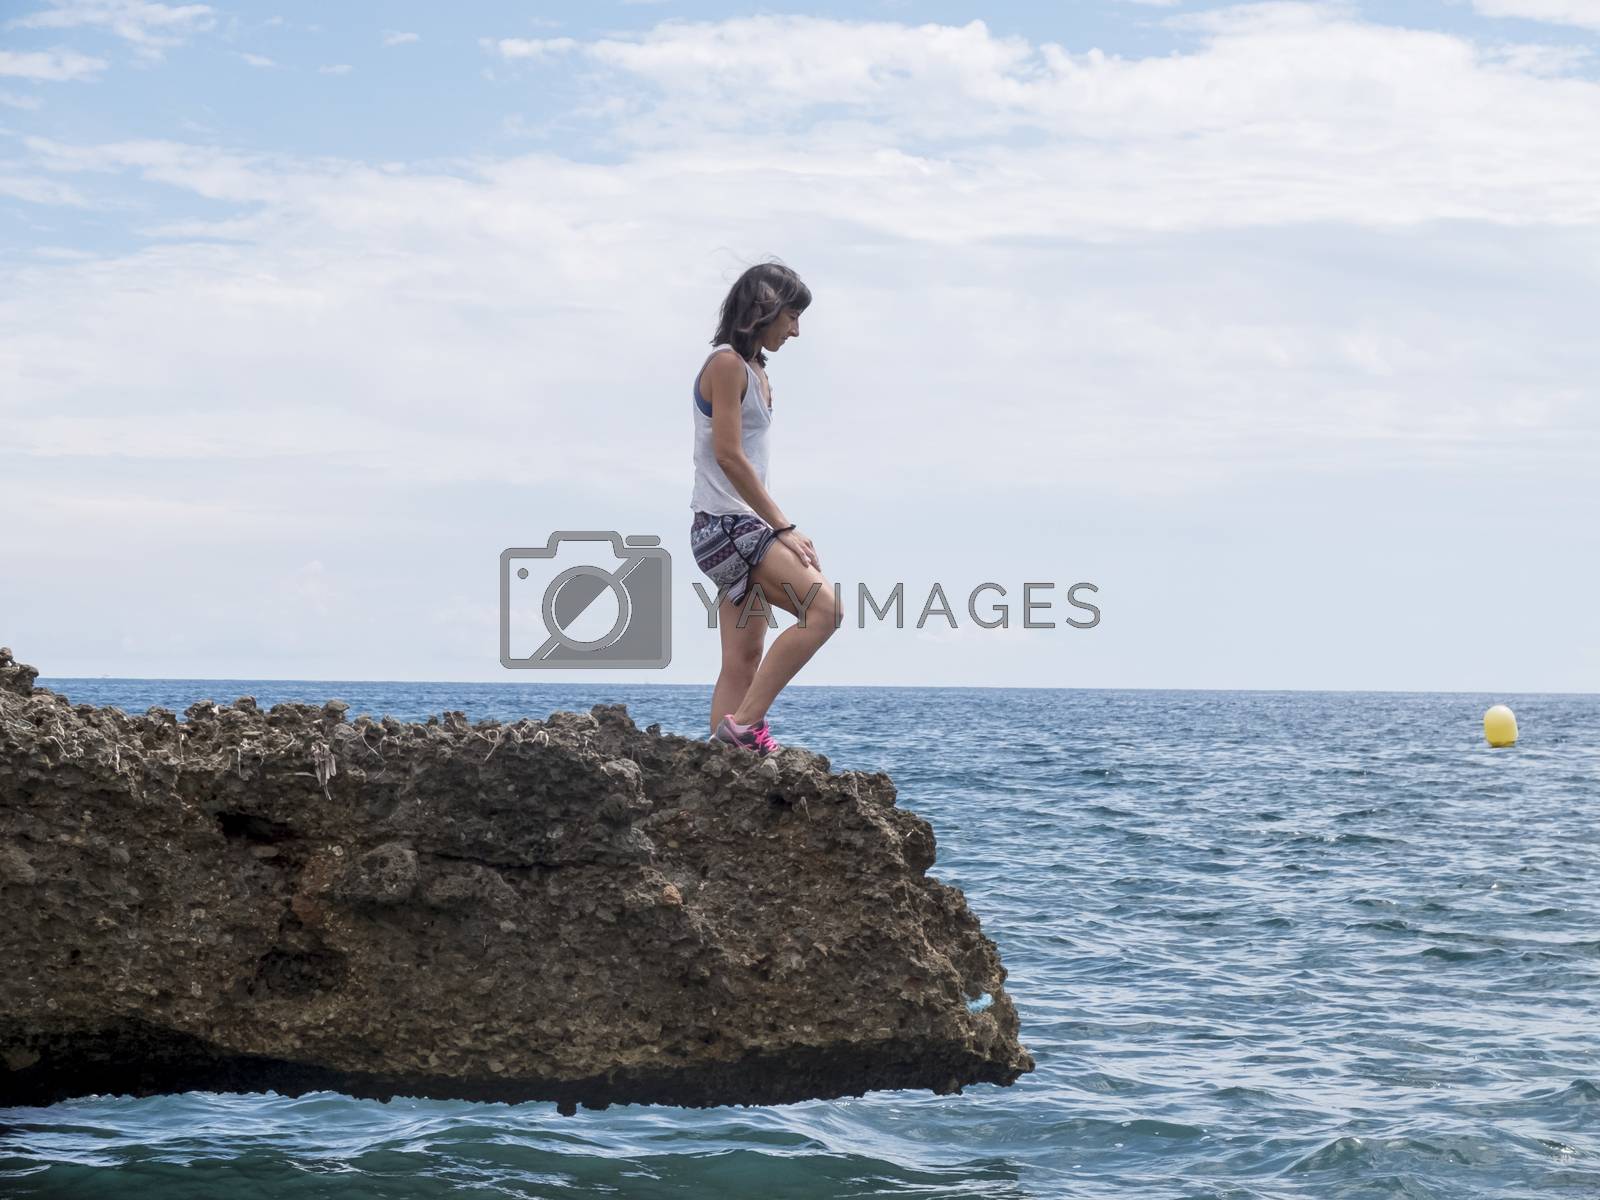 Royalty free image of Side view of a woman standing on sea rocks by raferto1973